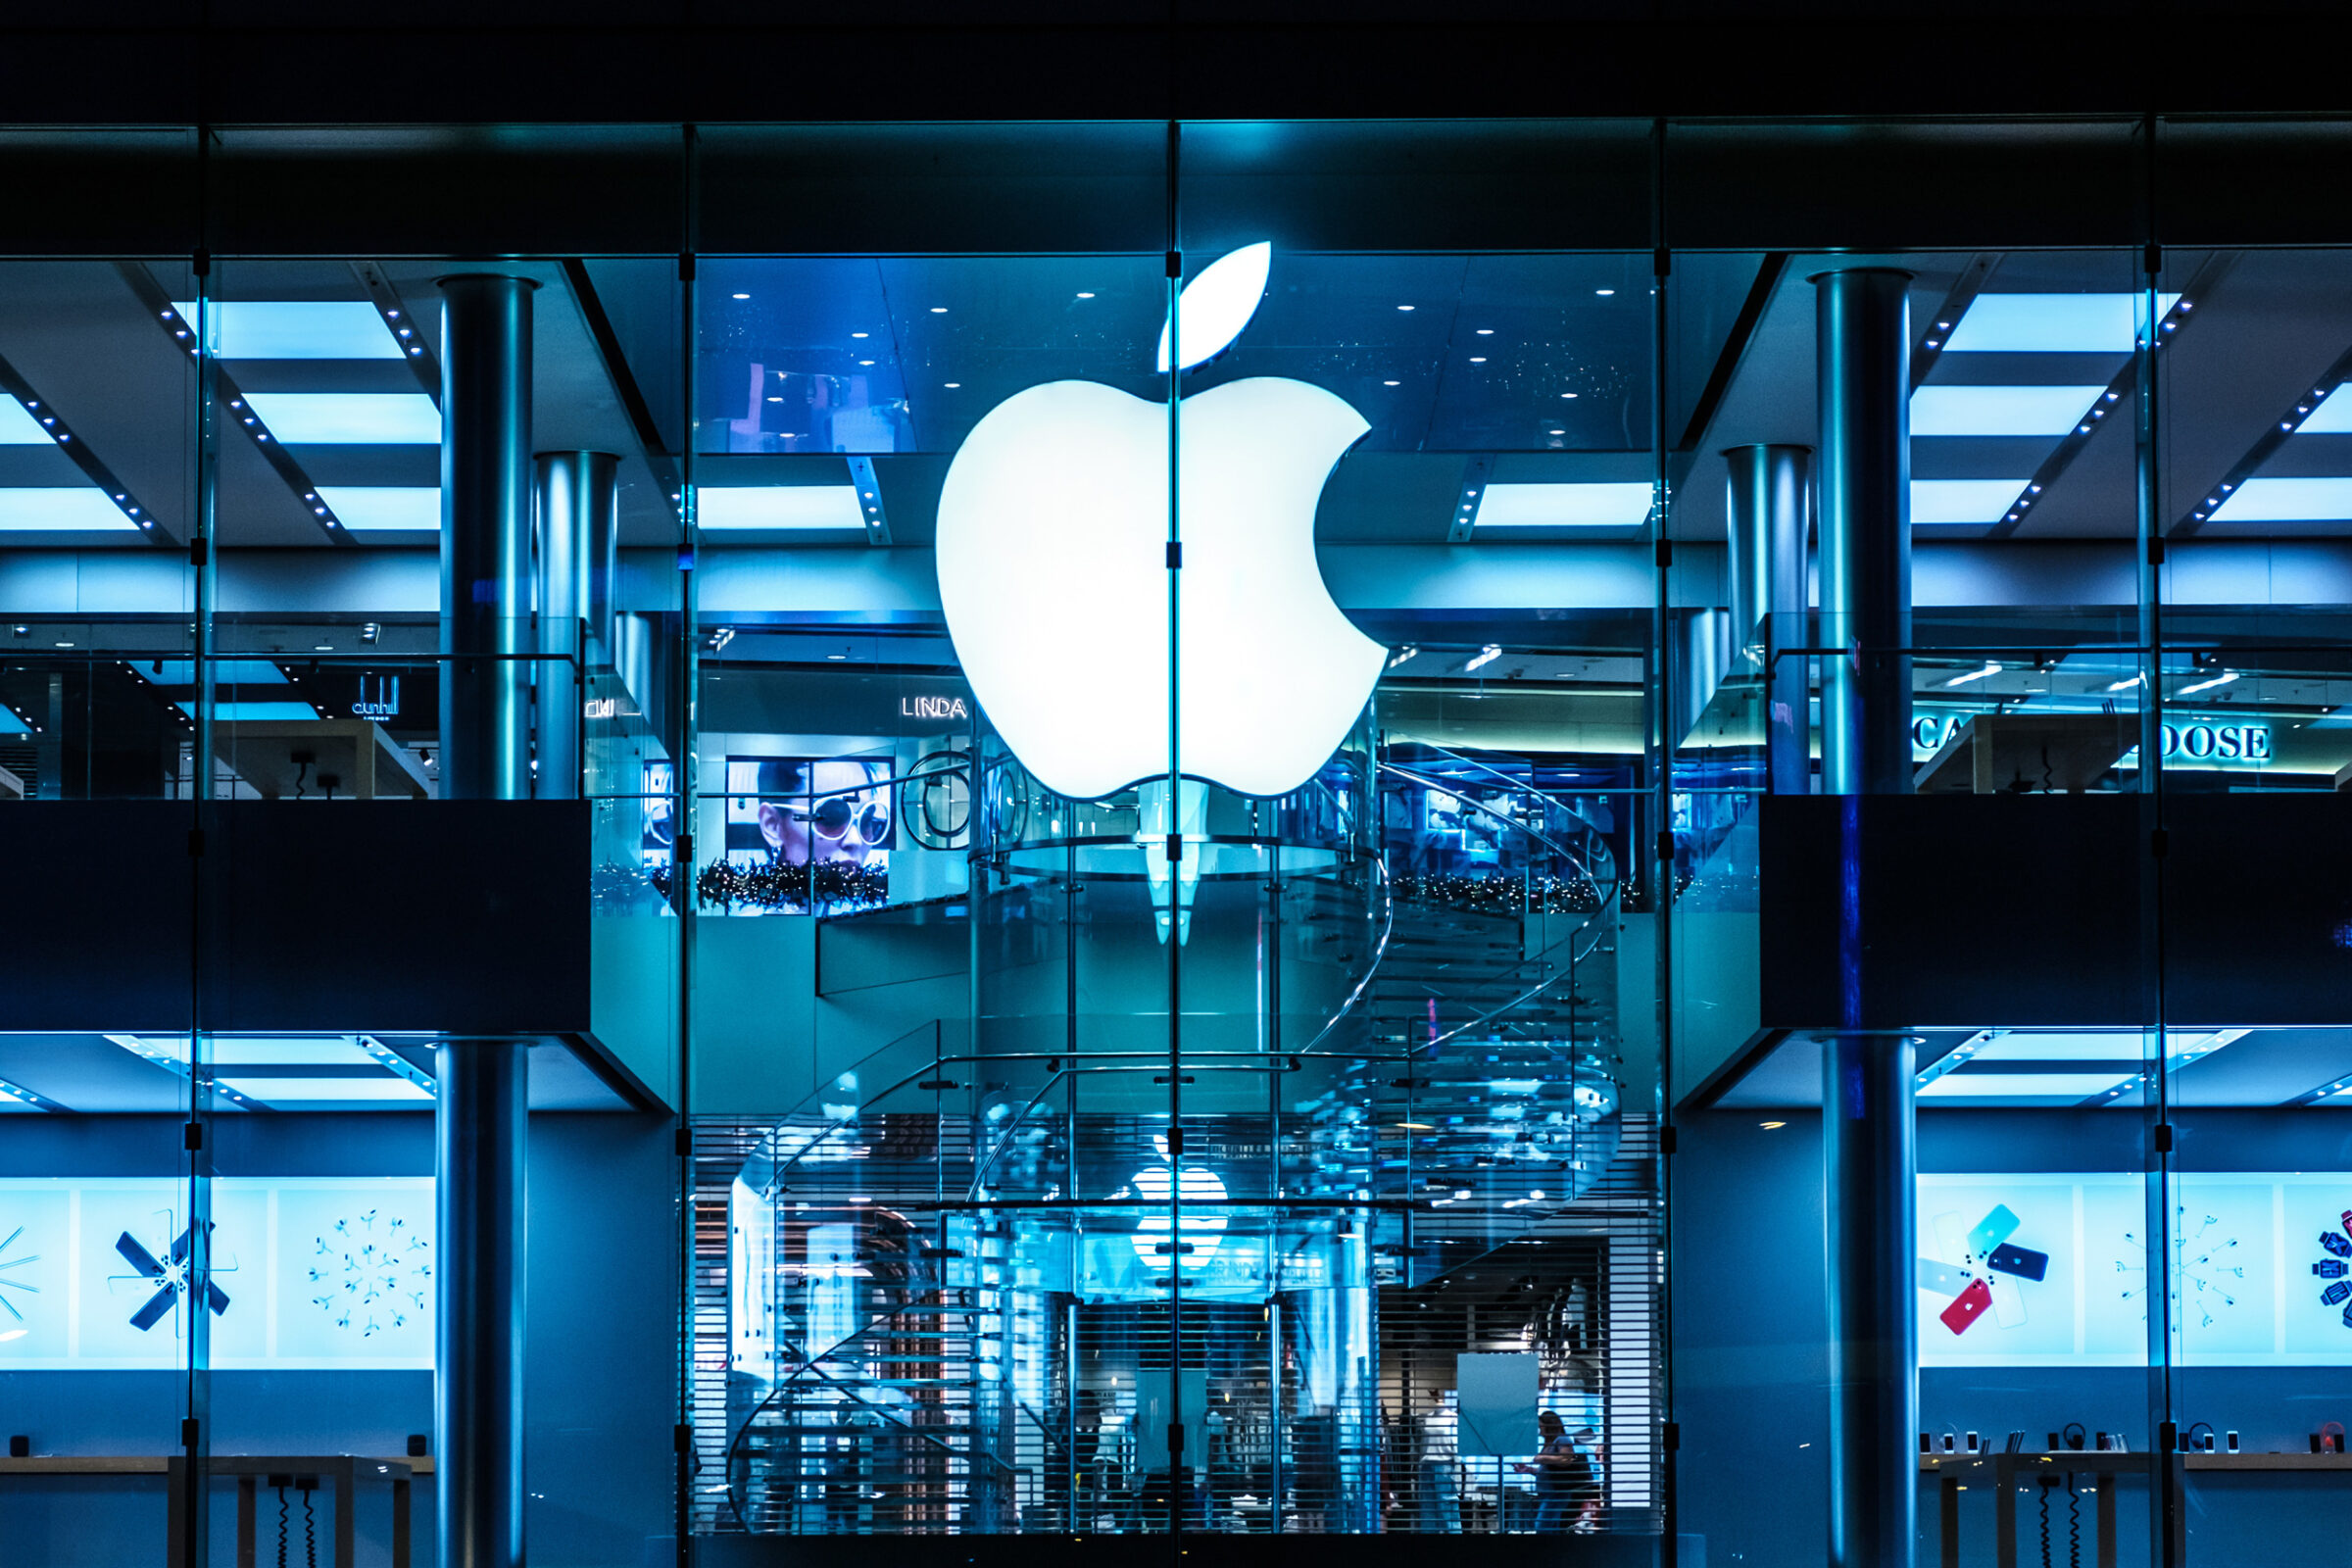 Bright image of the Apple logo on a glass building.